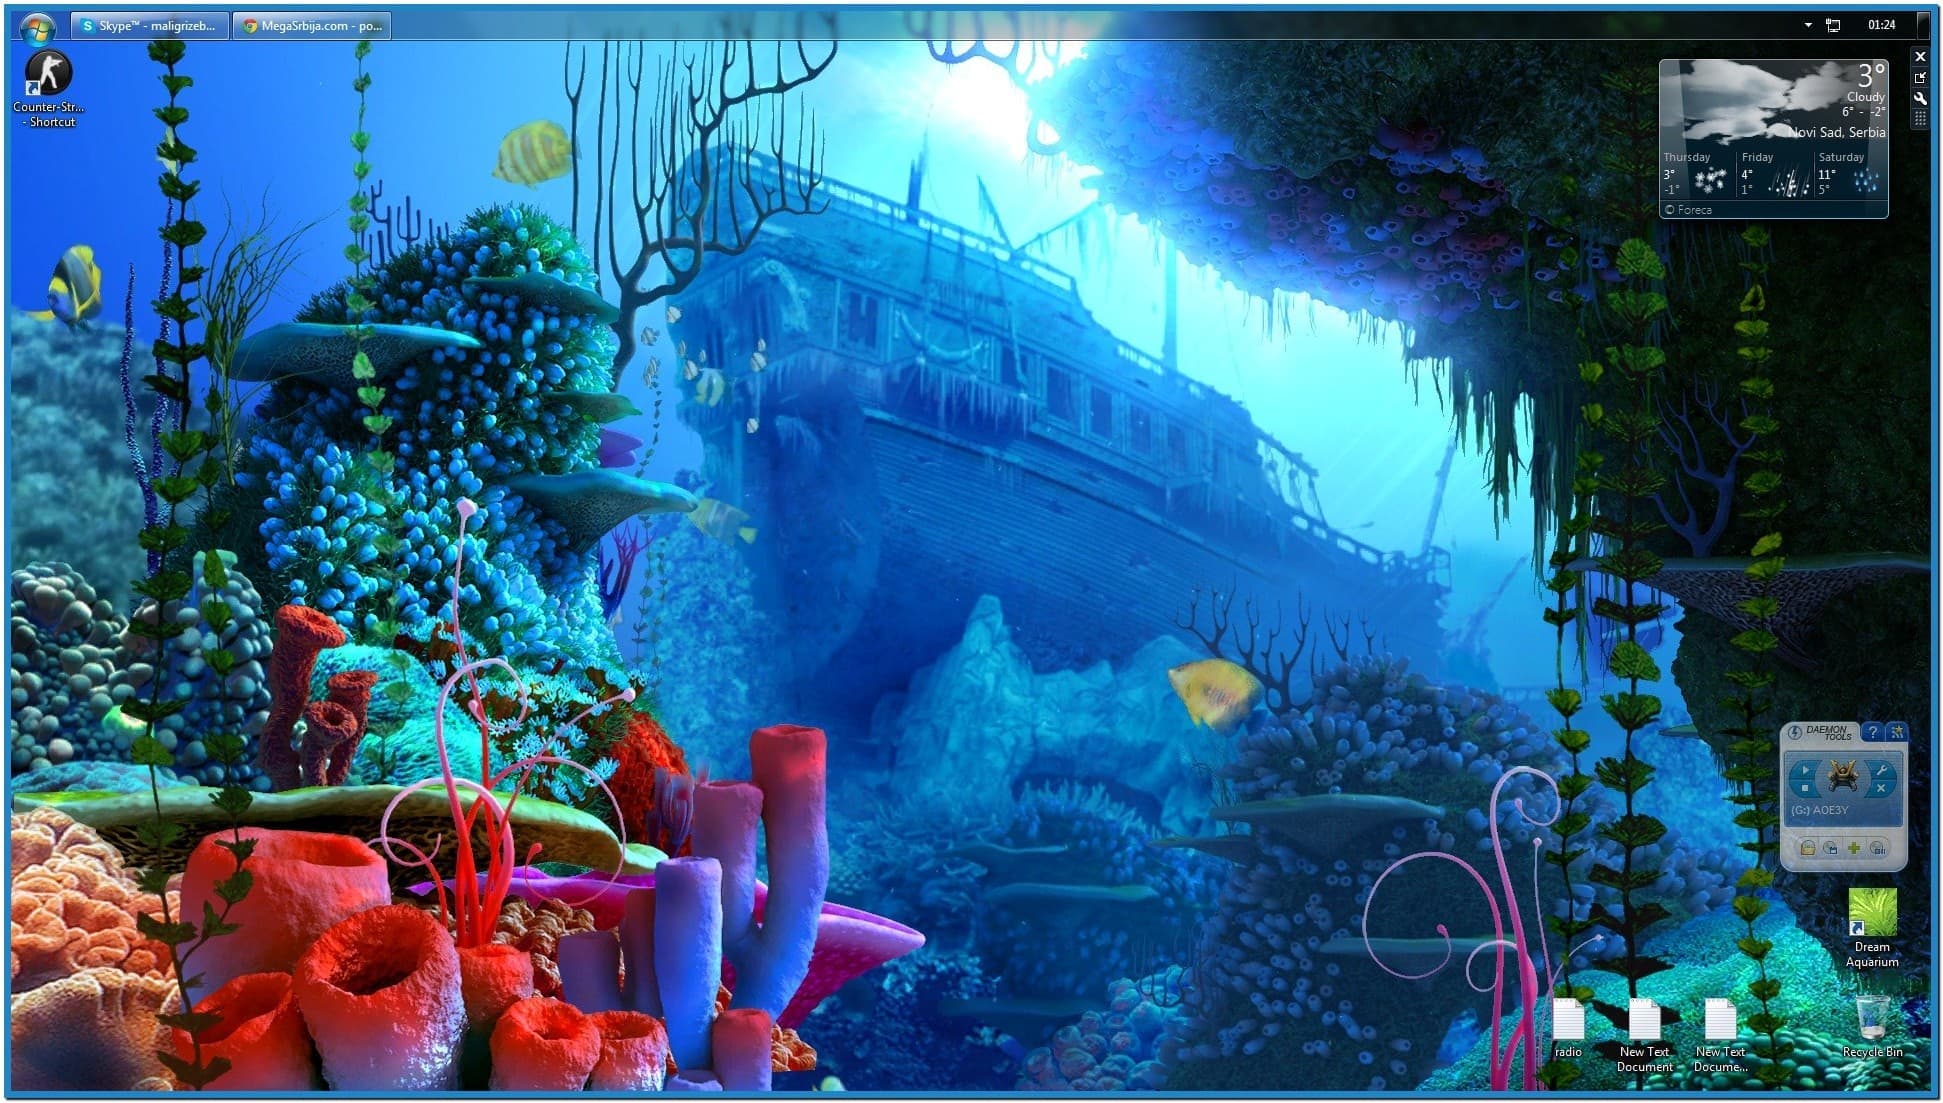 Coral reef 3d screensaver and animated wallpaper 114   Download free